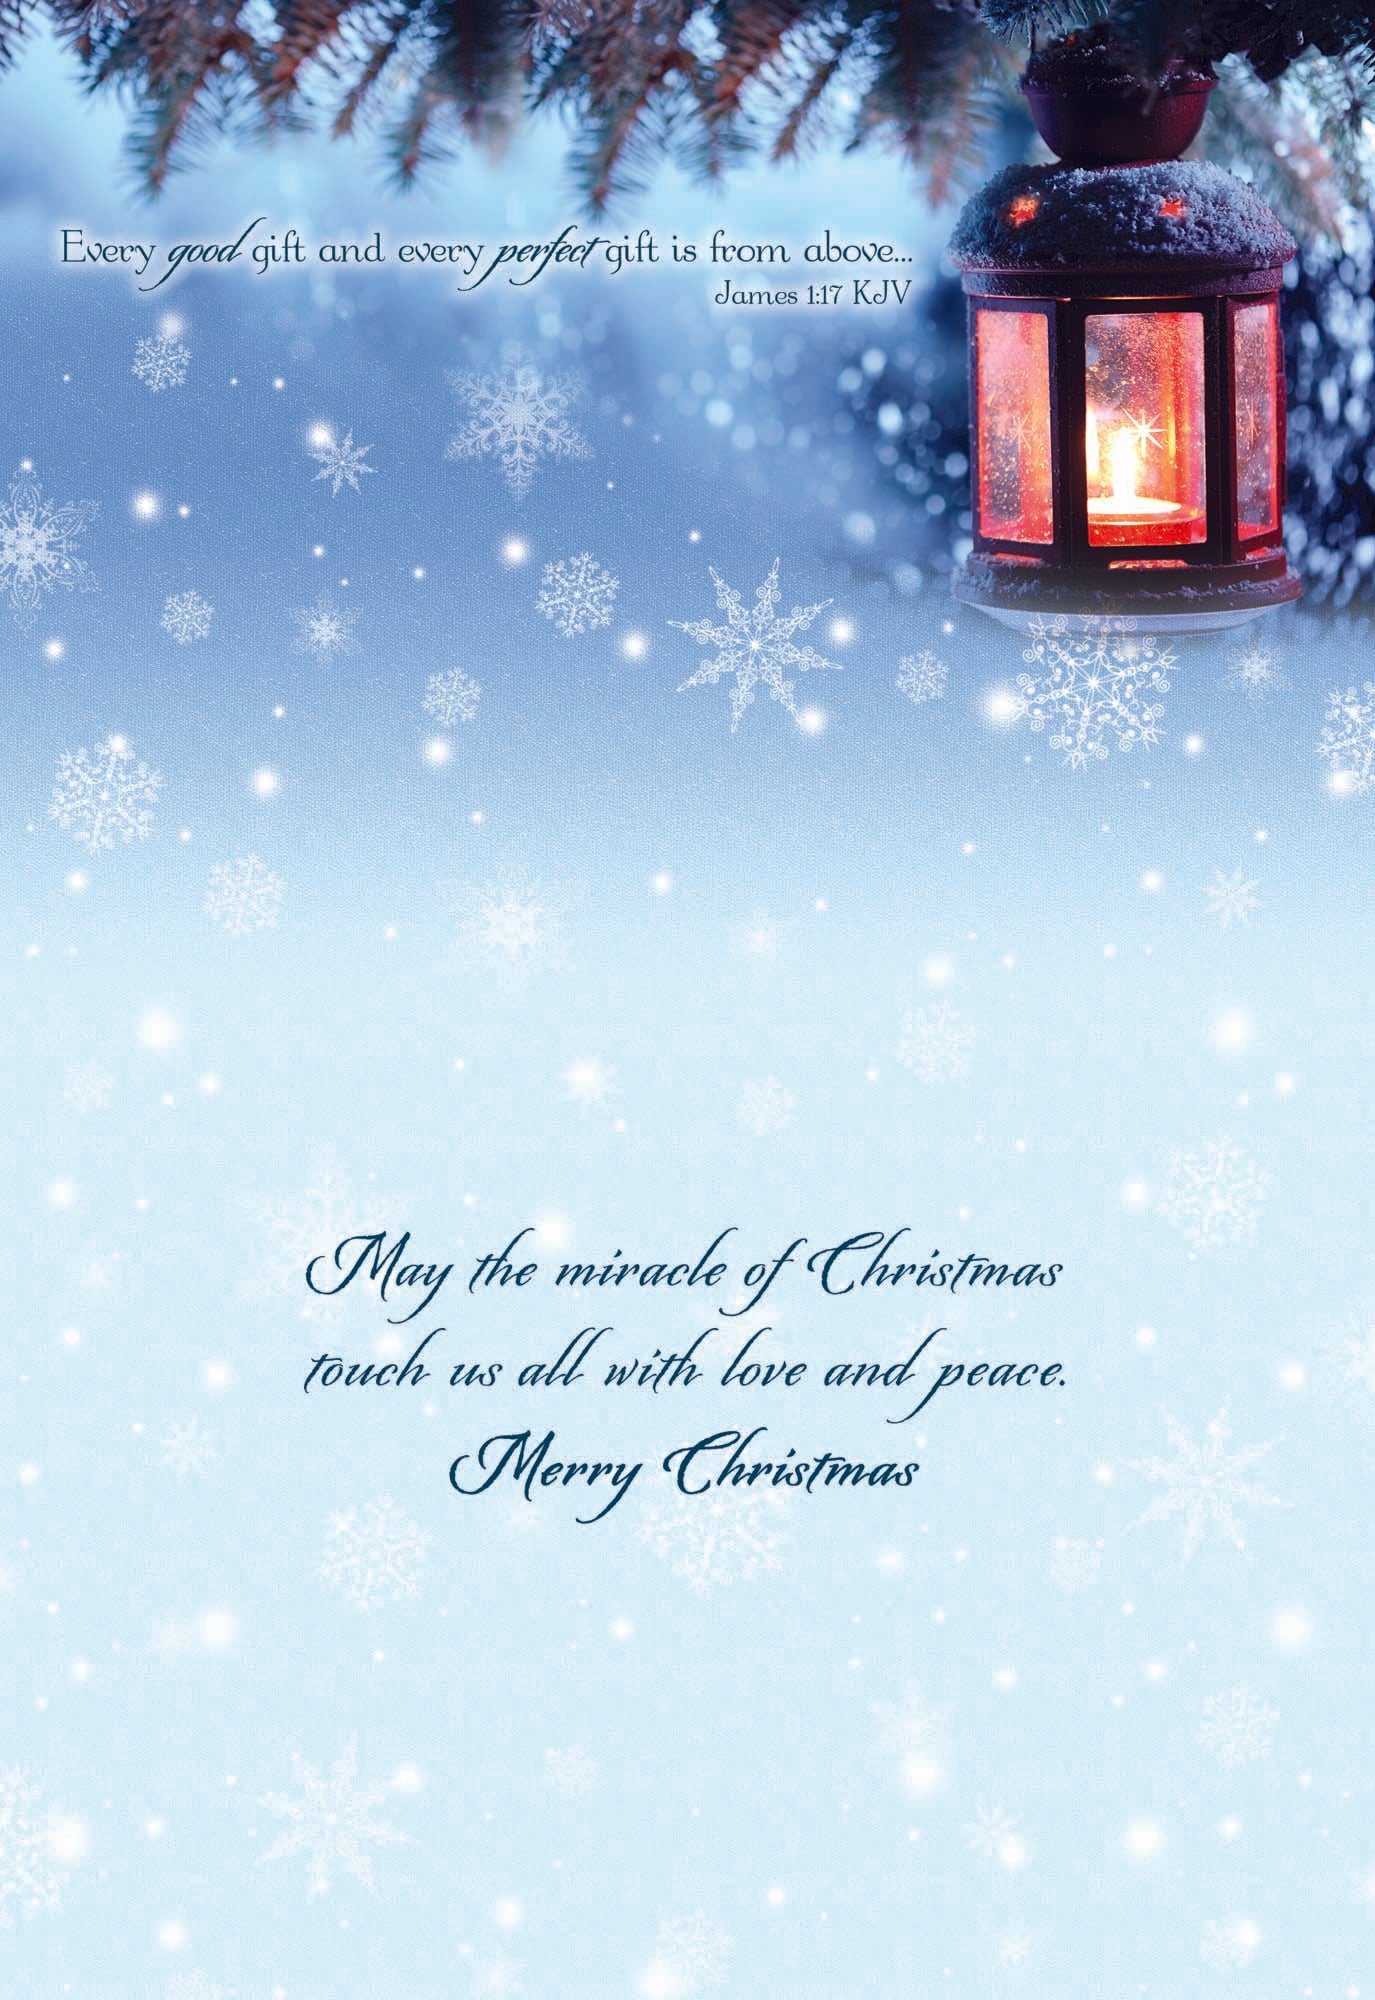 Glory to God - Large Christmas Card Boxed Assortment with KJV Scripture